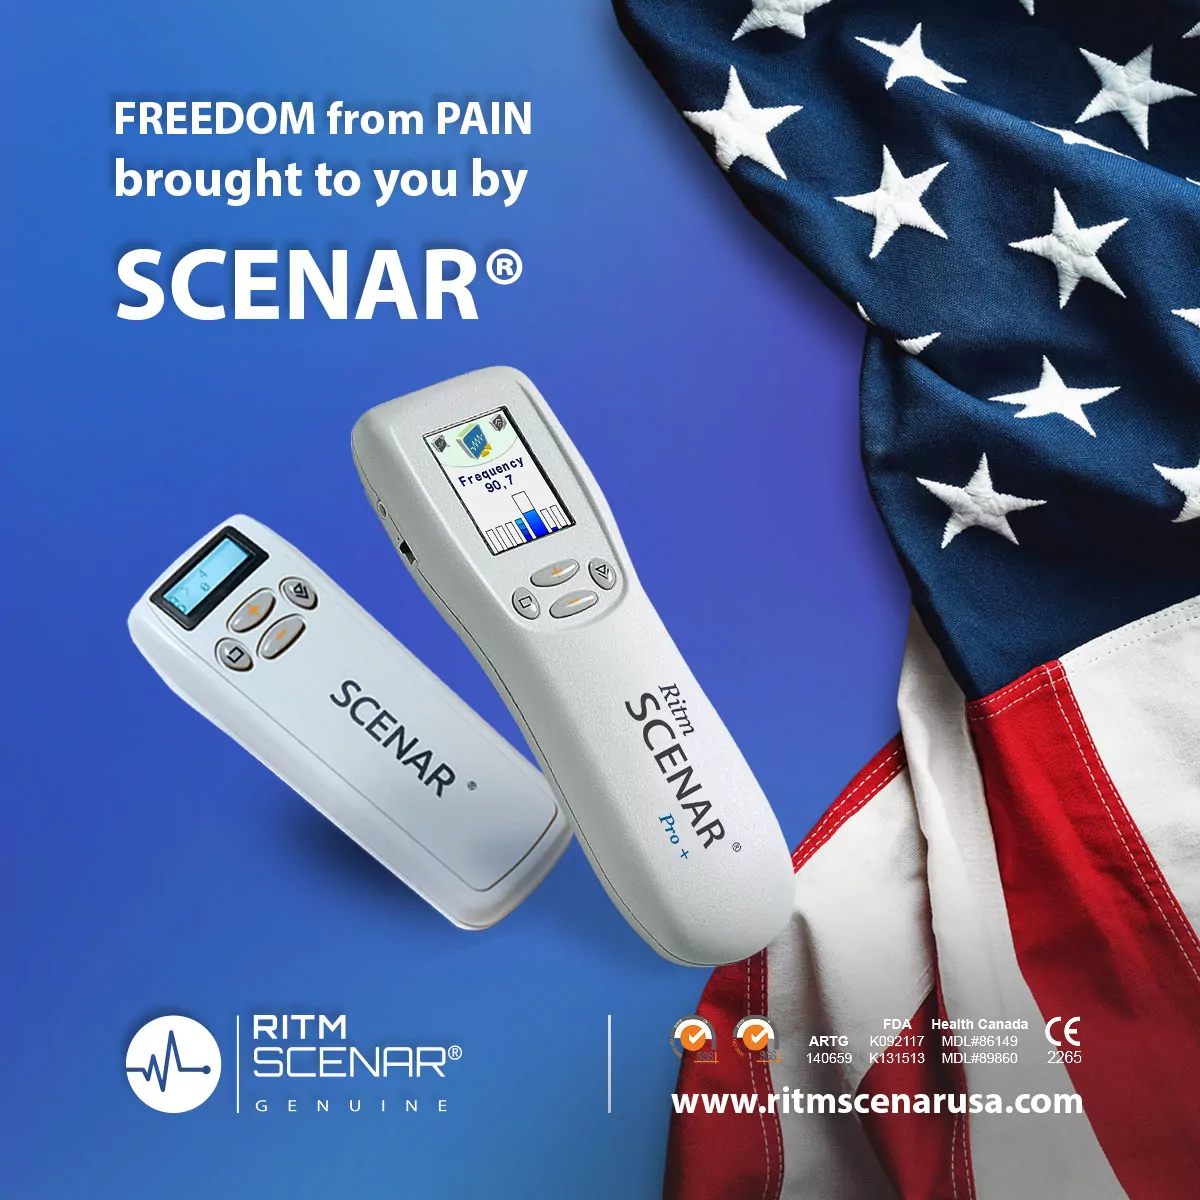 FREEDOM from PAIN brought to you by SCENAR®